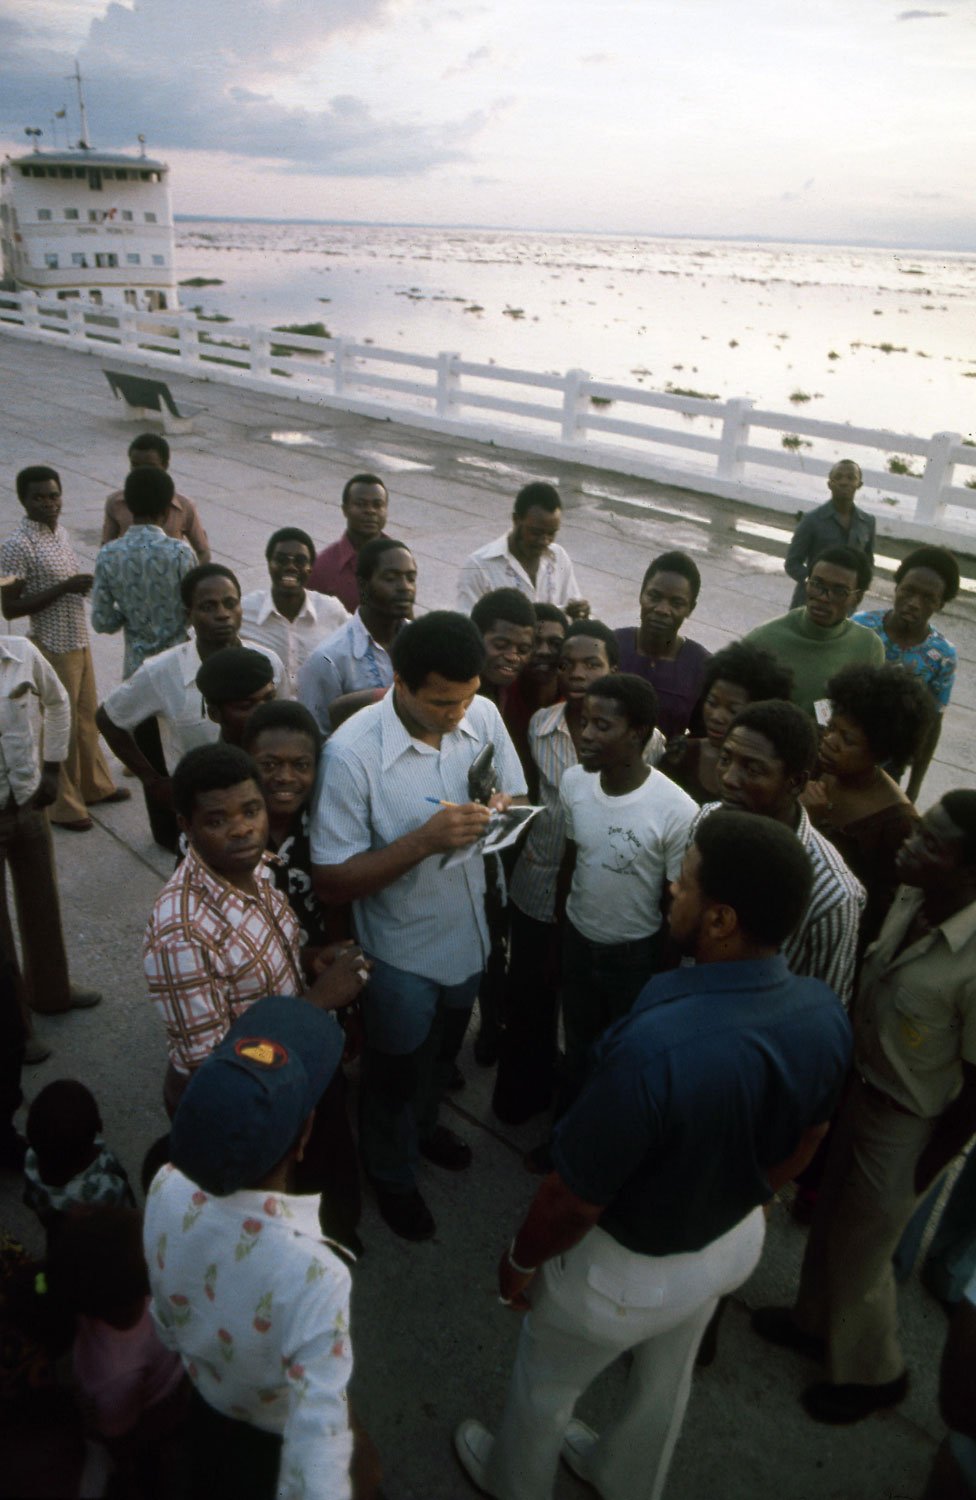 Muhammad Ali signing an autograph amidst a crowd of admirers on the shore of the Congo River at Kinshasa, Zaire, September 1974, prior to his championship fight against George Foreman